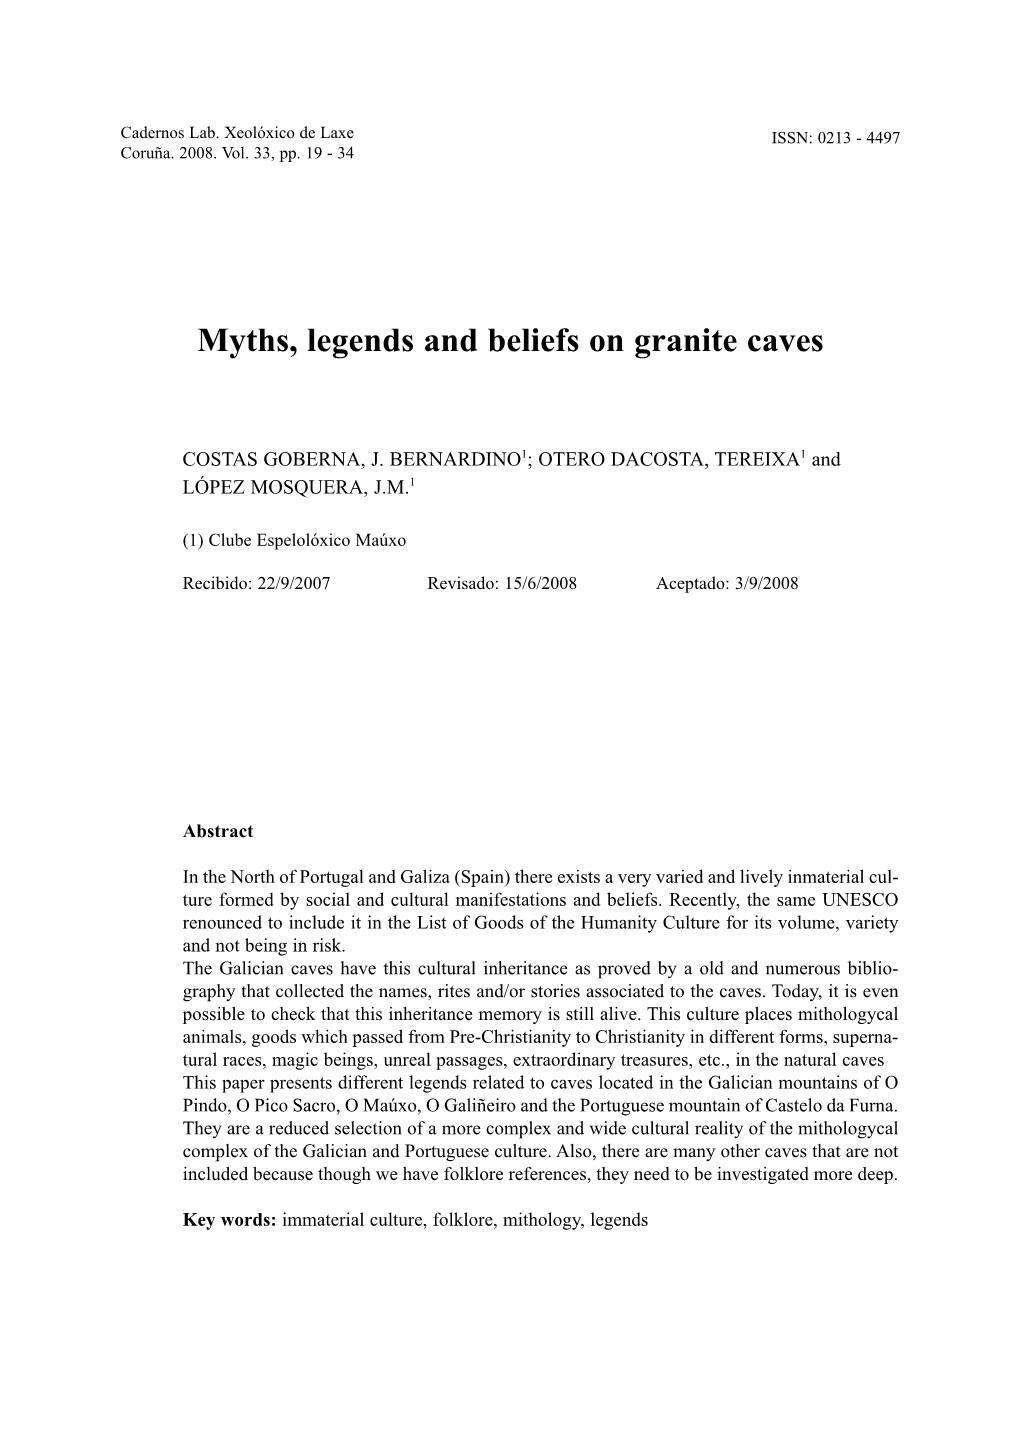 Myths, Legends and Beliefs on Granite Caves